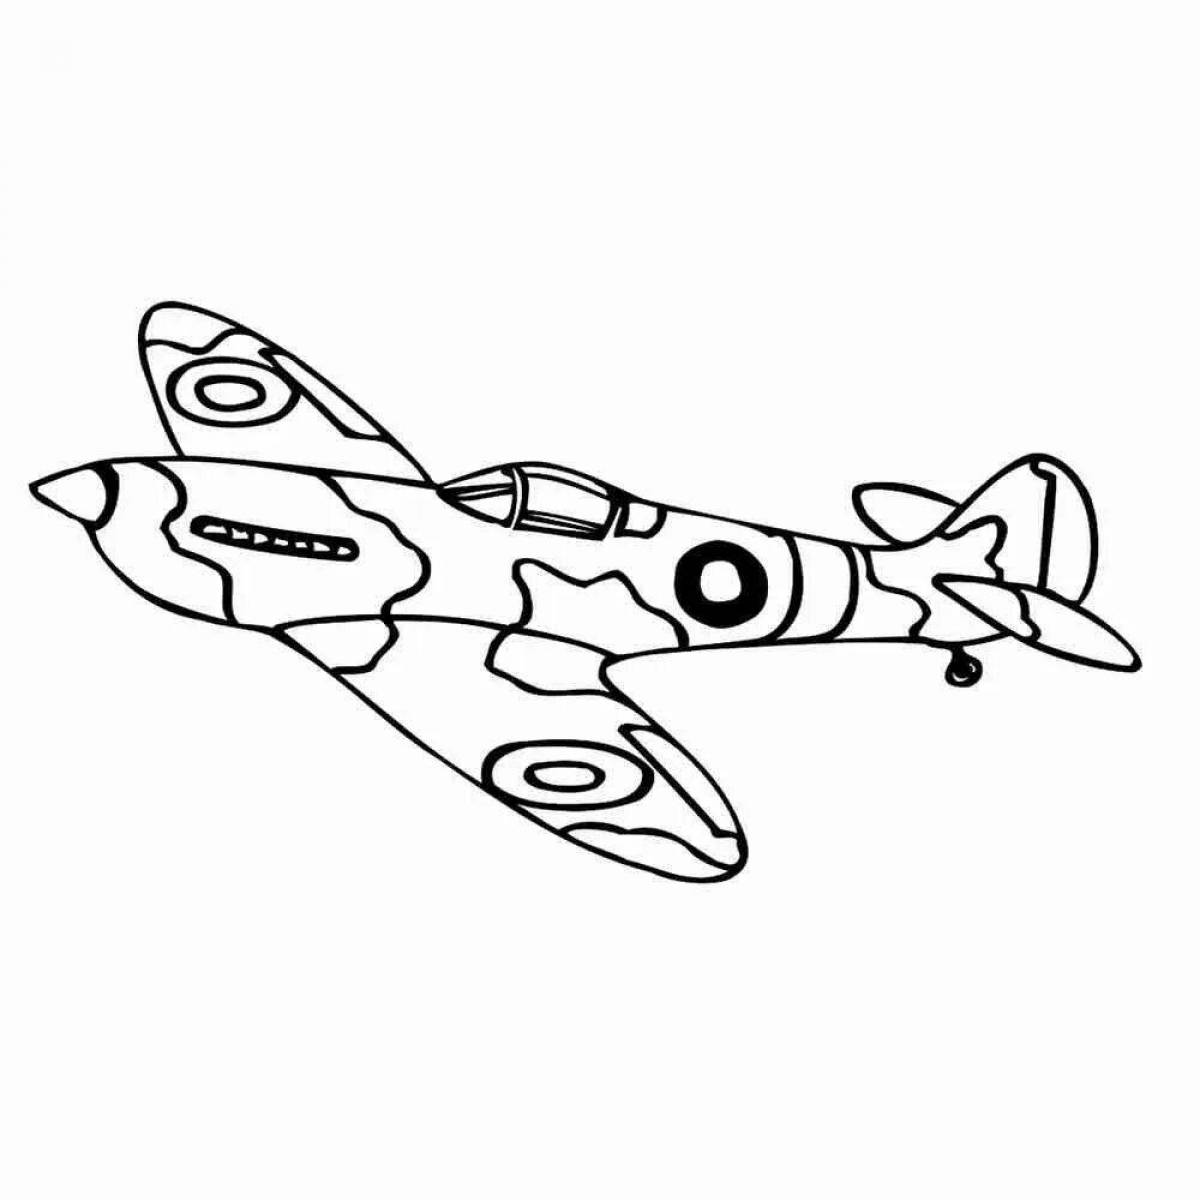 Fantastic fighter coloring book for 5-6 year olds